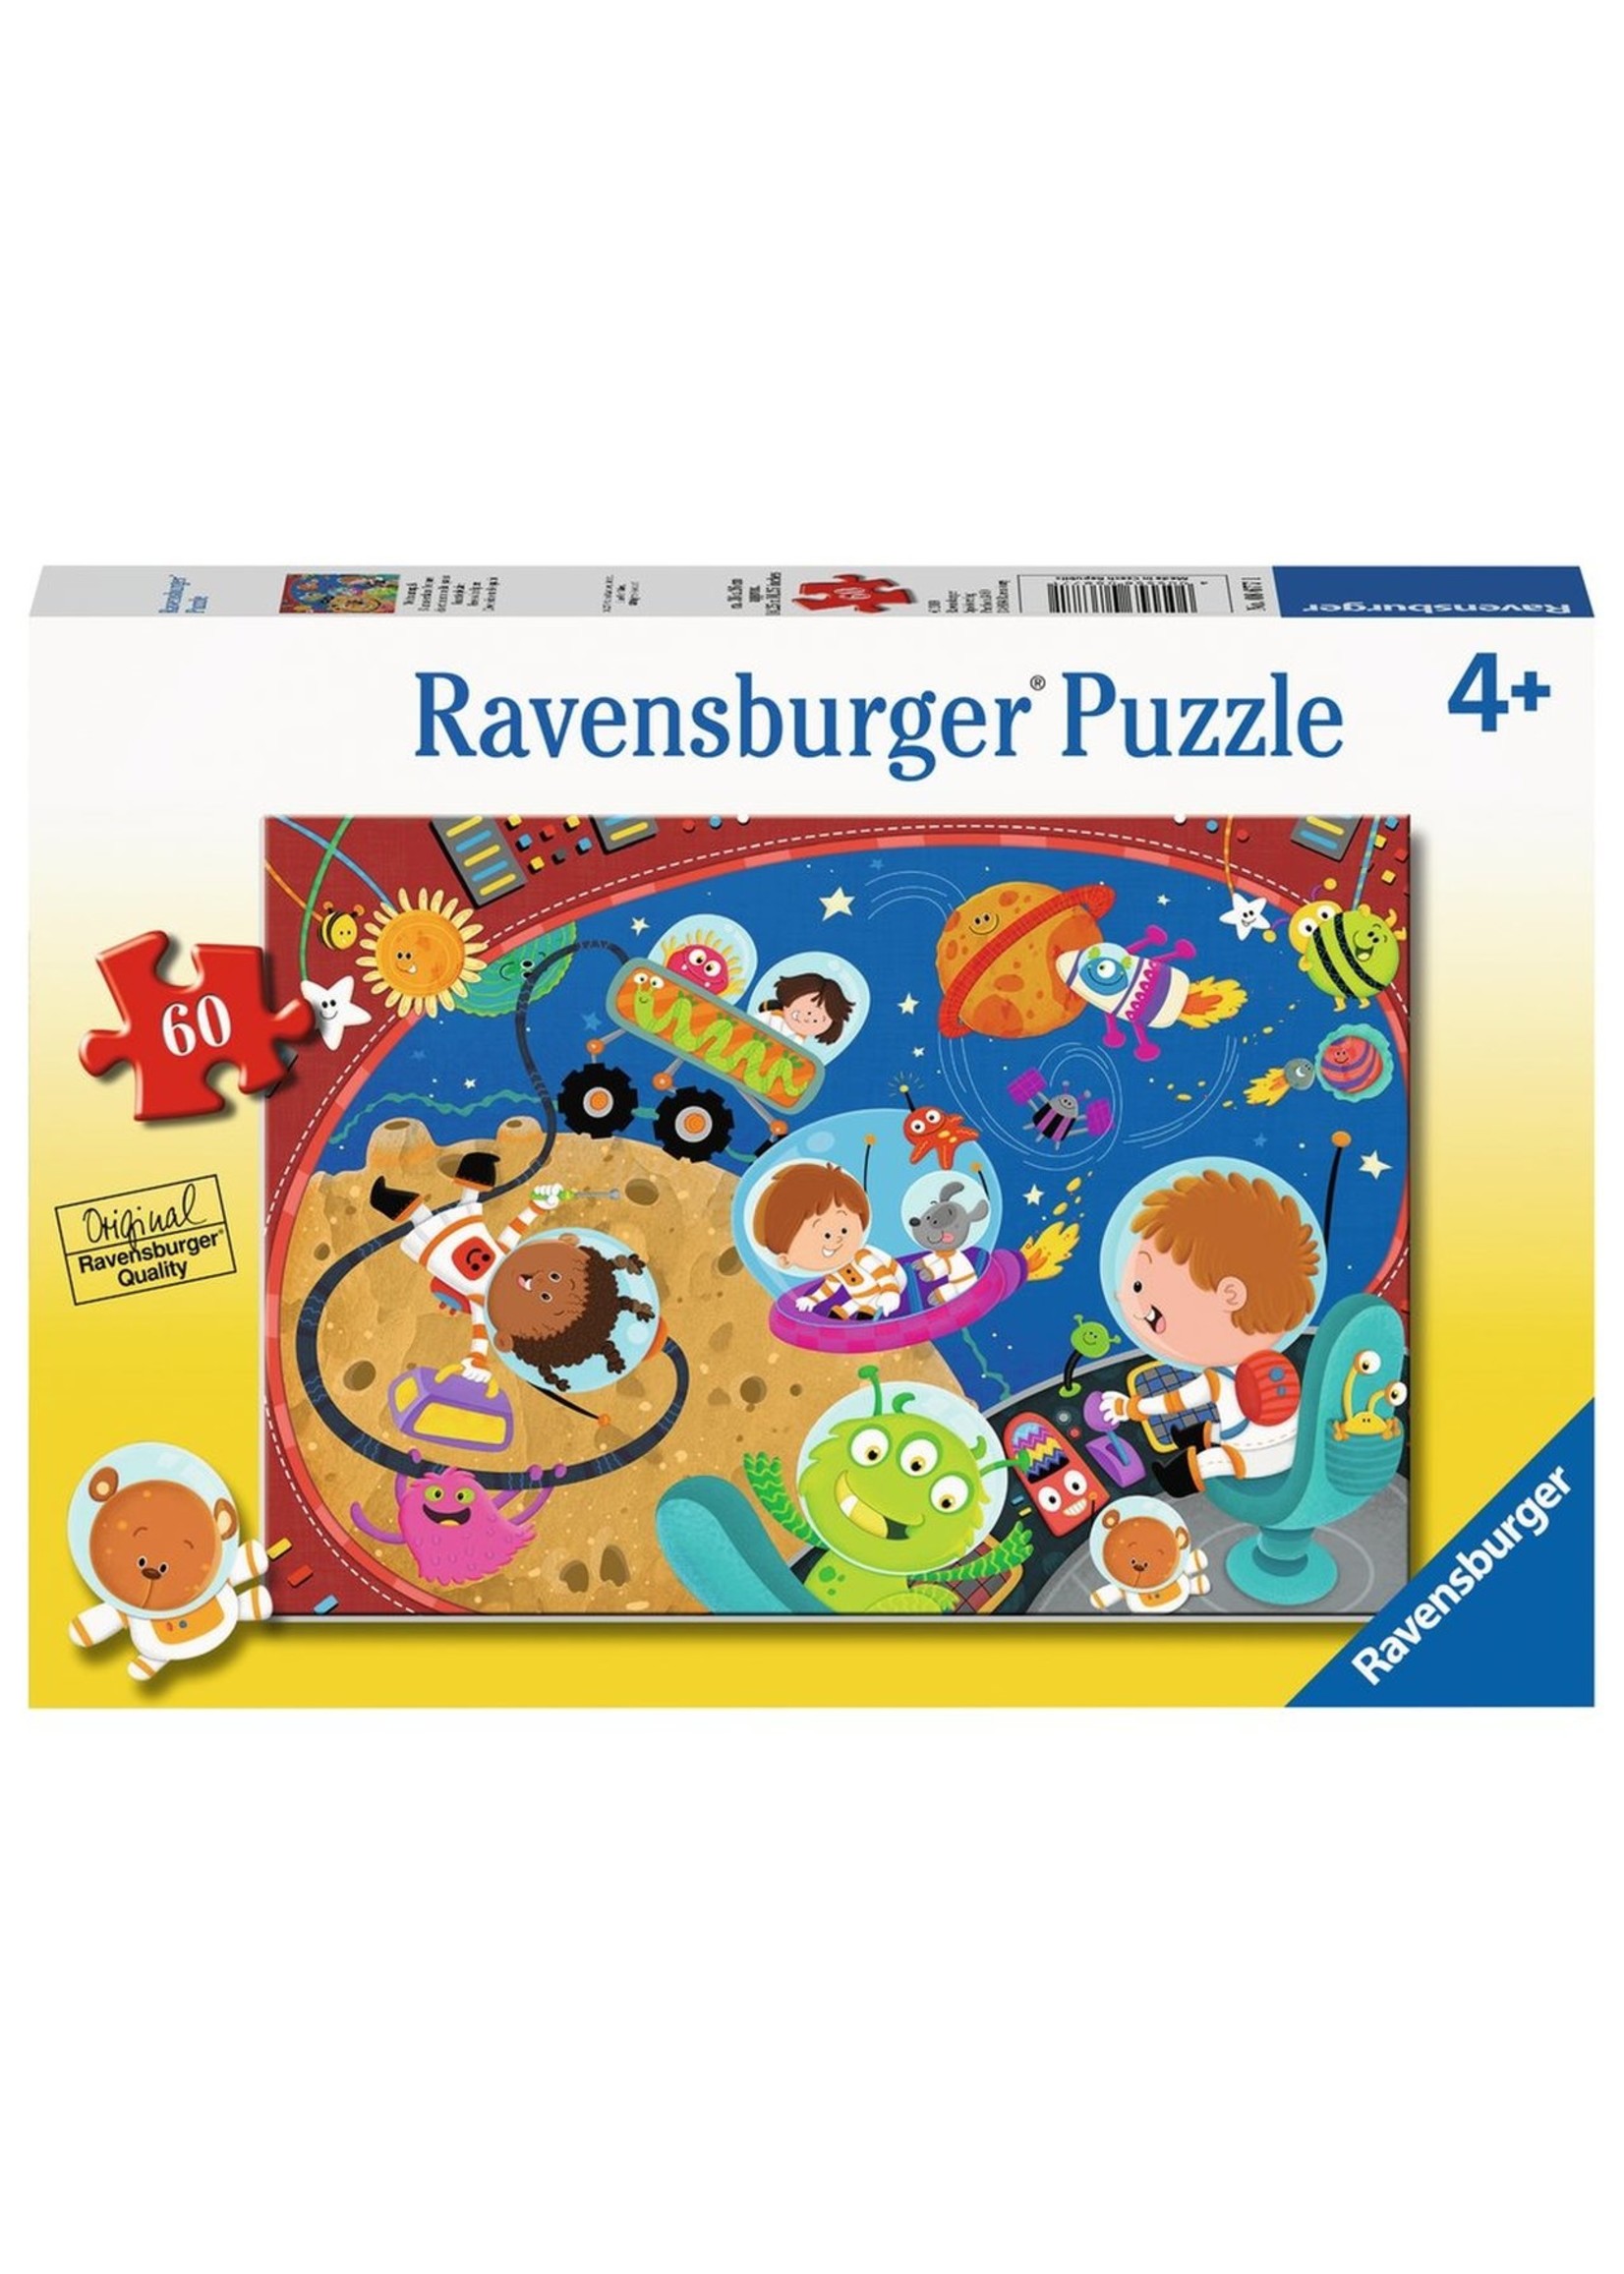 Ravensburger "Recess in Space!" 35 Piece Puzzle